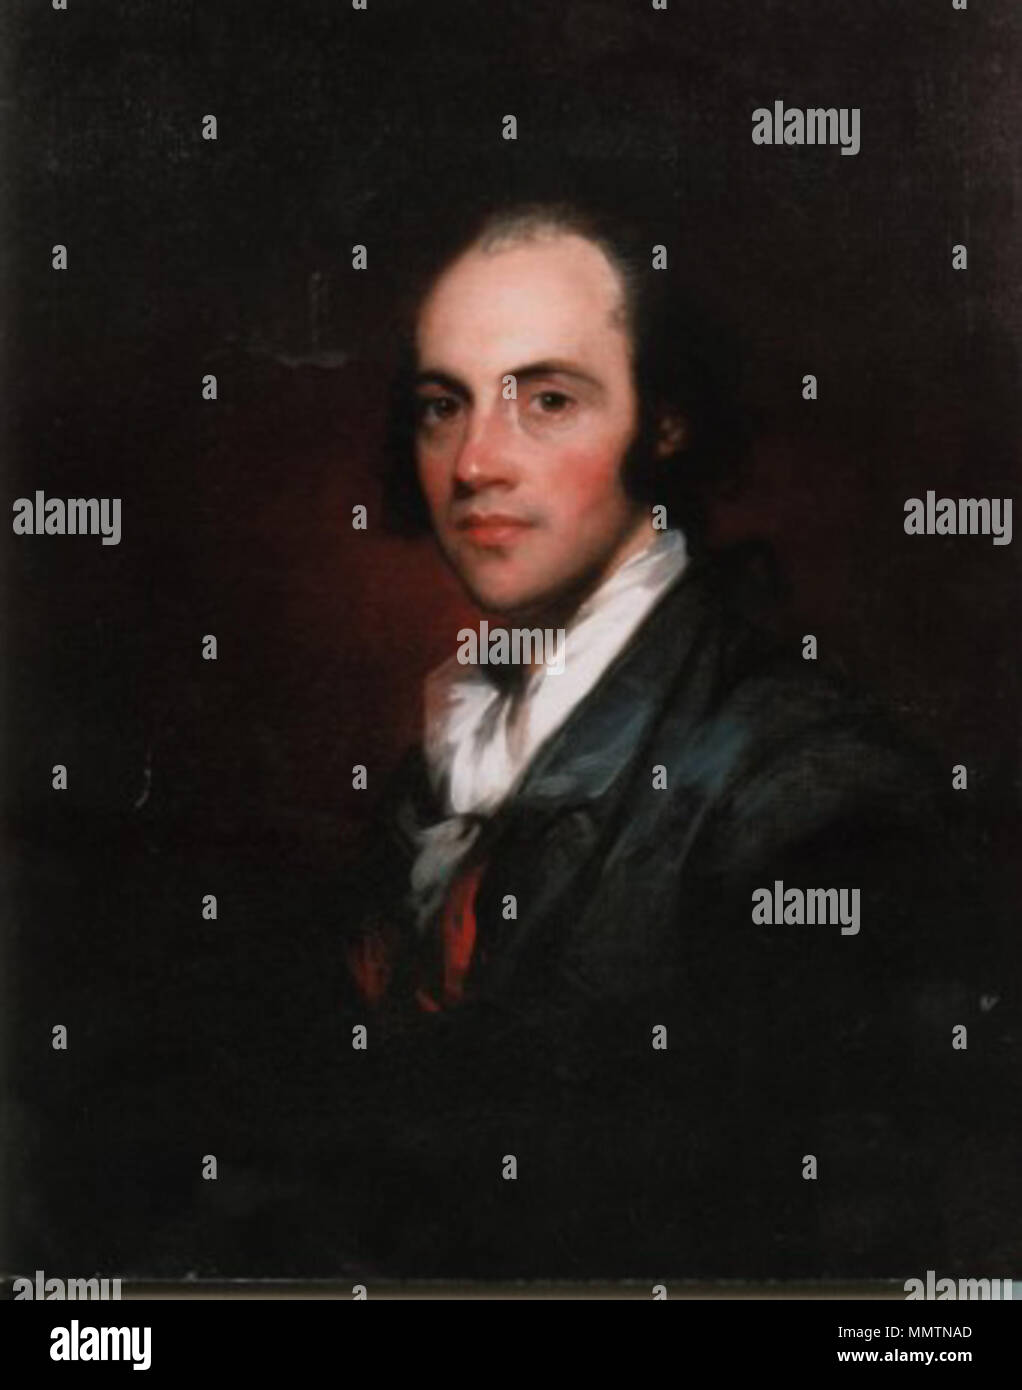 . English: Portrait of Aaron Burr (1756-1836); Collection of the New Jersey Historical Society  . 1793 or 1794.   Attributed to Gilbert Stuart  (1755–1828)      Alternative names Gilbert Charles Stuart ; Birth name: Gilbert Charles Stewart  Description American painter  Date of birth/death 3 December 1755 9 July 1828  Location of birth/death North Kingston (Newport, Rhode Island) Boston  Work location Boston, New York City, London, Dublin  Authority control  : Q41402 VIAF:?61689381 ISNI:?0000 0000 6634 9660 ULAN:?500010392 LCCN:?n50083265 NLA:?35149085 WorldCat Burr Stock Photo